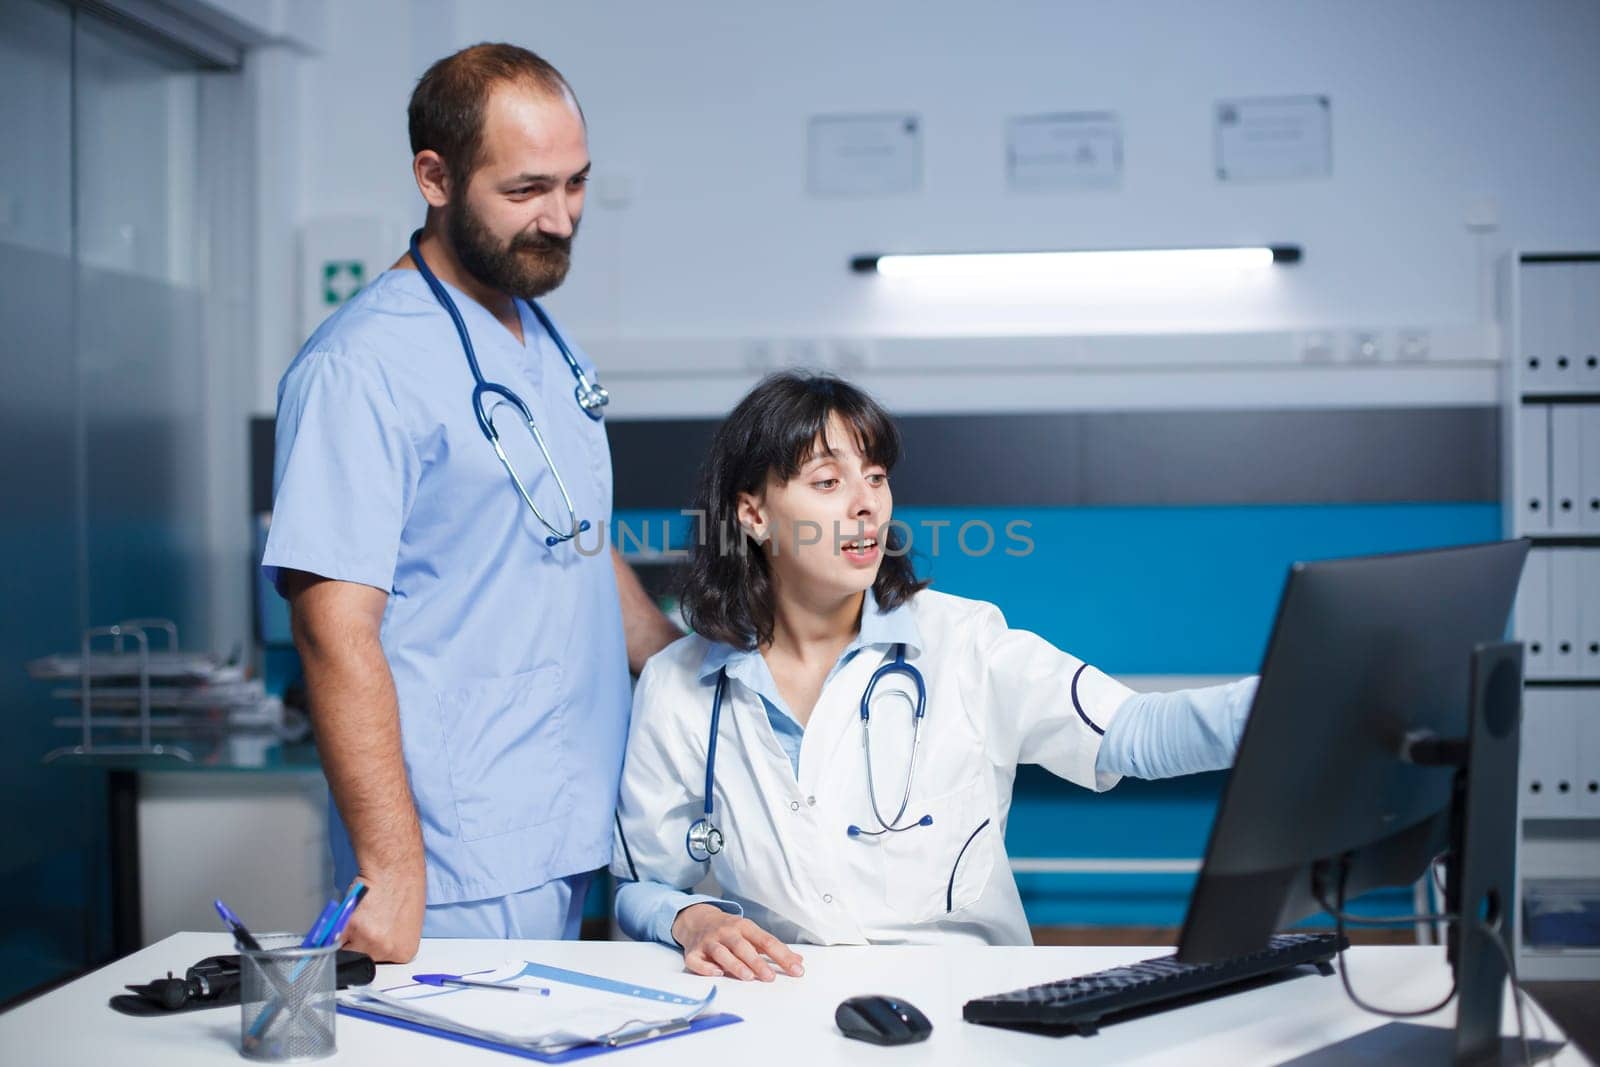 Doctor and nurse in clinic office preparing for medical consultations with patients. Their lab coats denote their profession, and the blue scrubs indicate a surgical role.